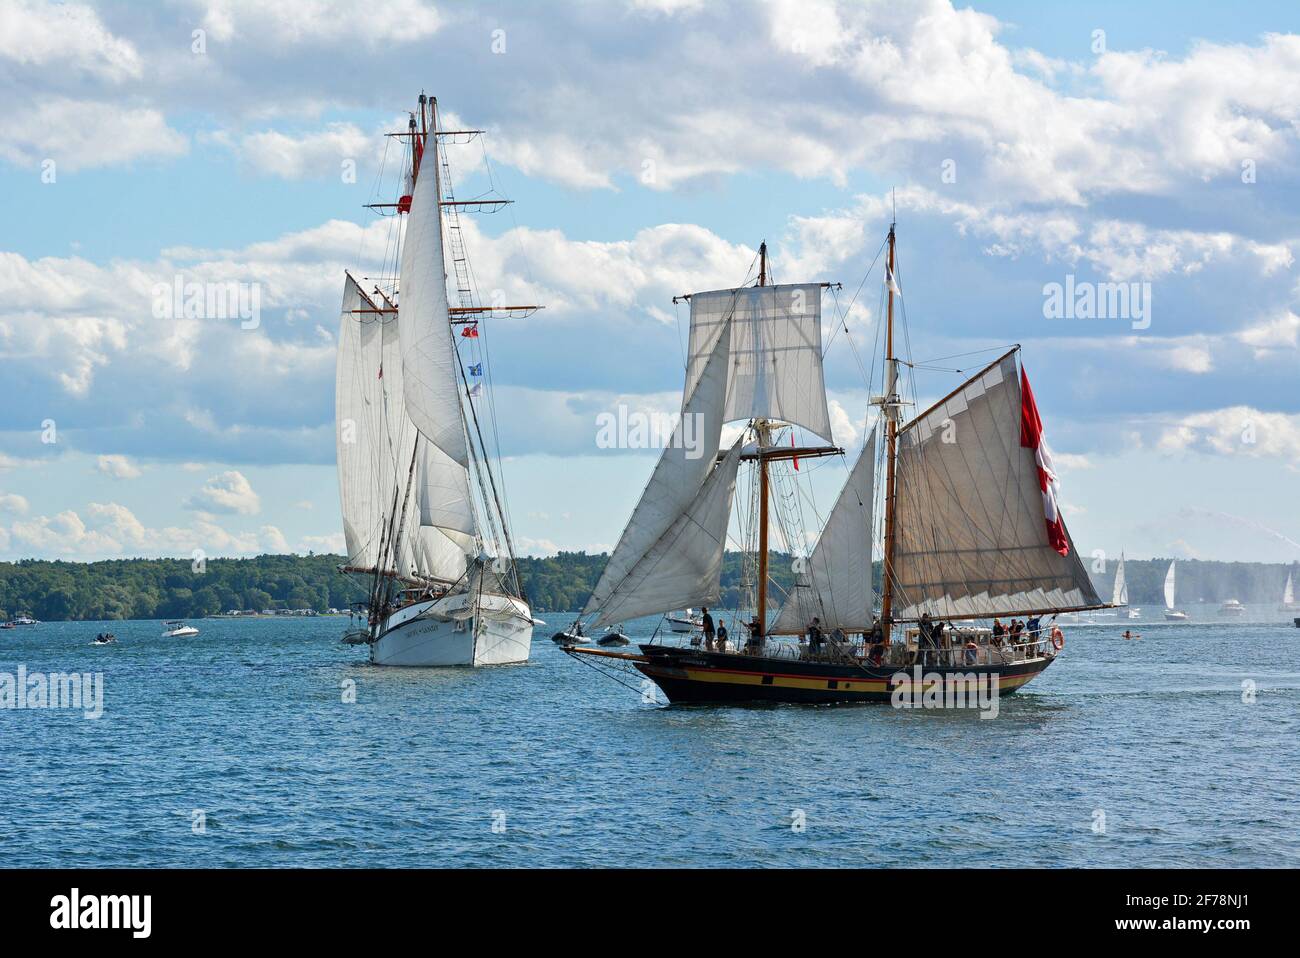 Brockville Canada, takes part in the TALL SHIPS CHALLENGE® Great Lakes Series which takes place in that region every three years and Brockville has been taking part since 2013. The next scheduled Great Lakes Tour will be in 2022.Tall ship, The Tall Ships,including the Bluenose II, and other watercraft at  Brockville Canada. Various views of  tall ship events at the Brockville waterfront at Blockhouse Island Parkway, Centeen Park, and Hardy Park. Stock Photo